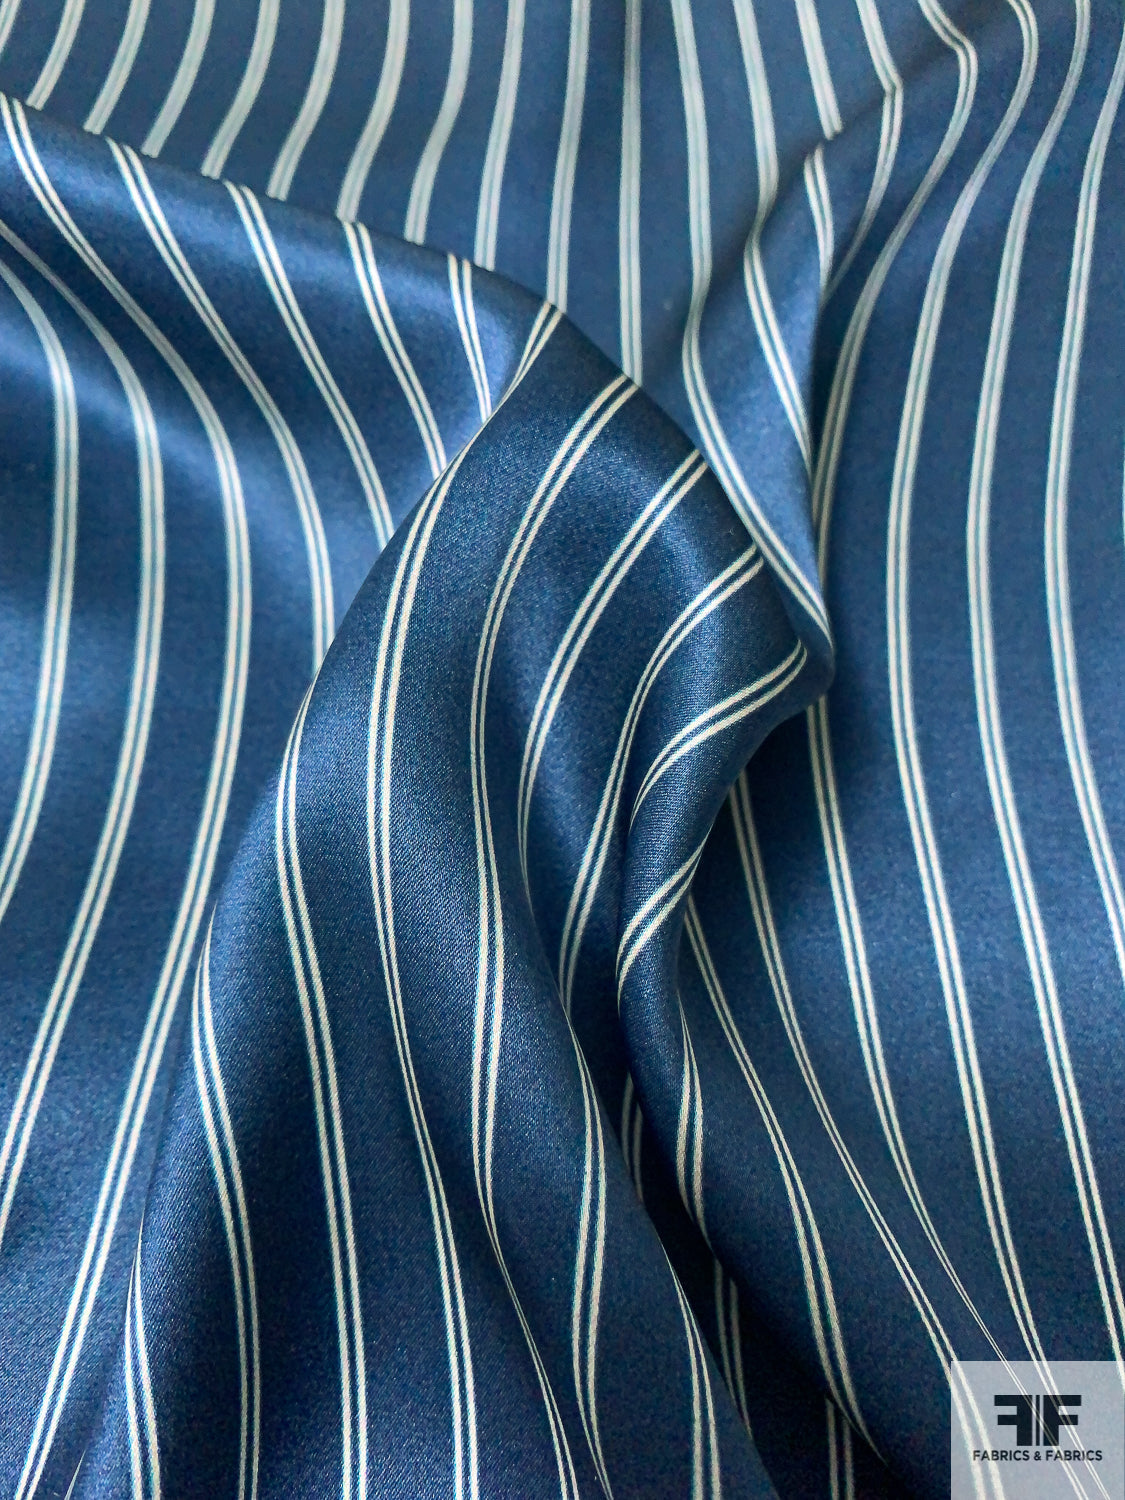 Vertical Duo Striped Printed Silk Charmeuse - Navy / White